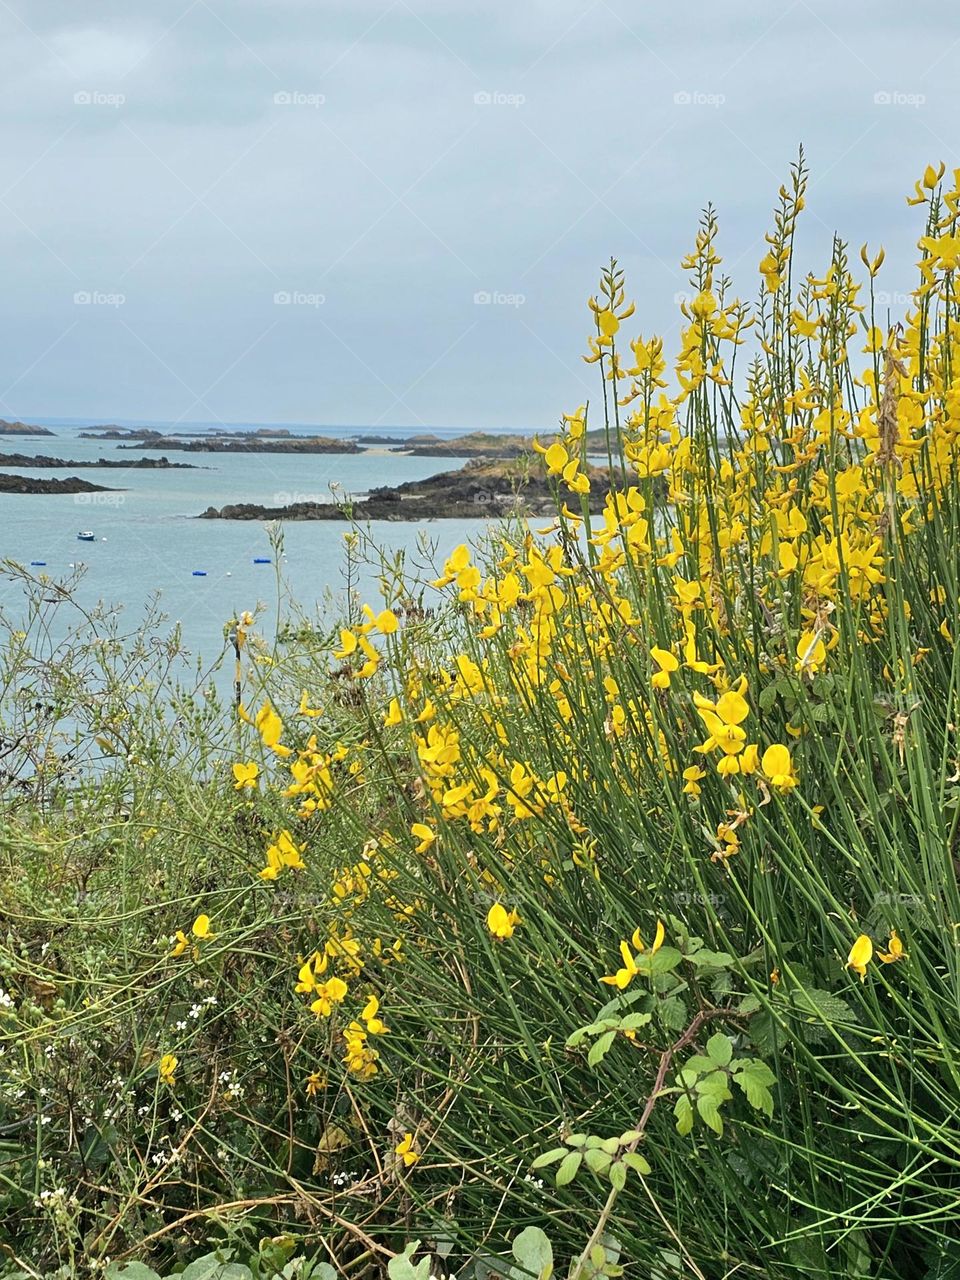 flowers in Chausey islands